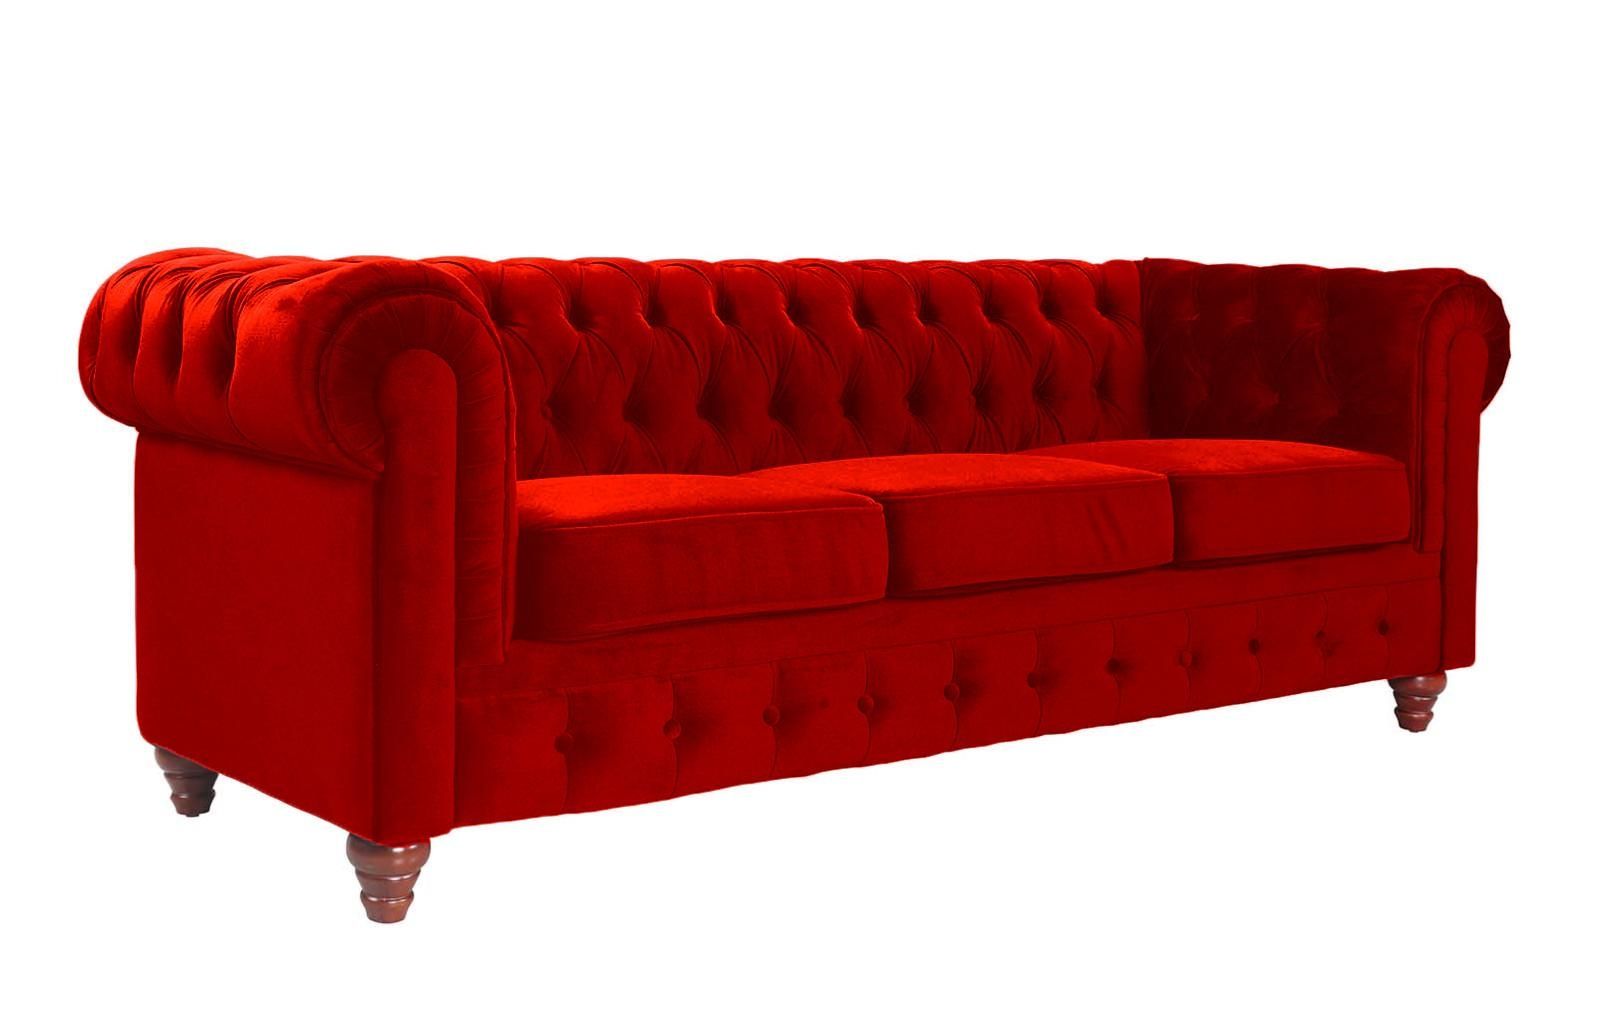 Classic Scroll Arm Tufted Velvet Chesterfield Large Sofa – Walmart Inside Red Chesterfield Sofas (View 12 of 20)